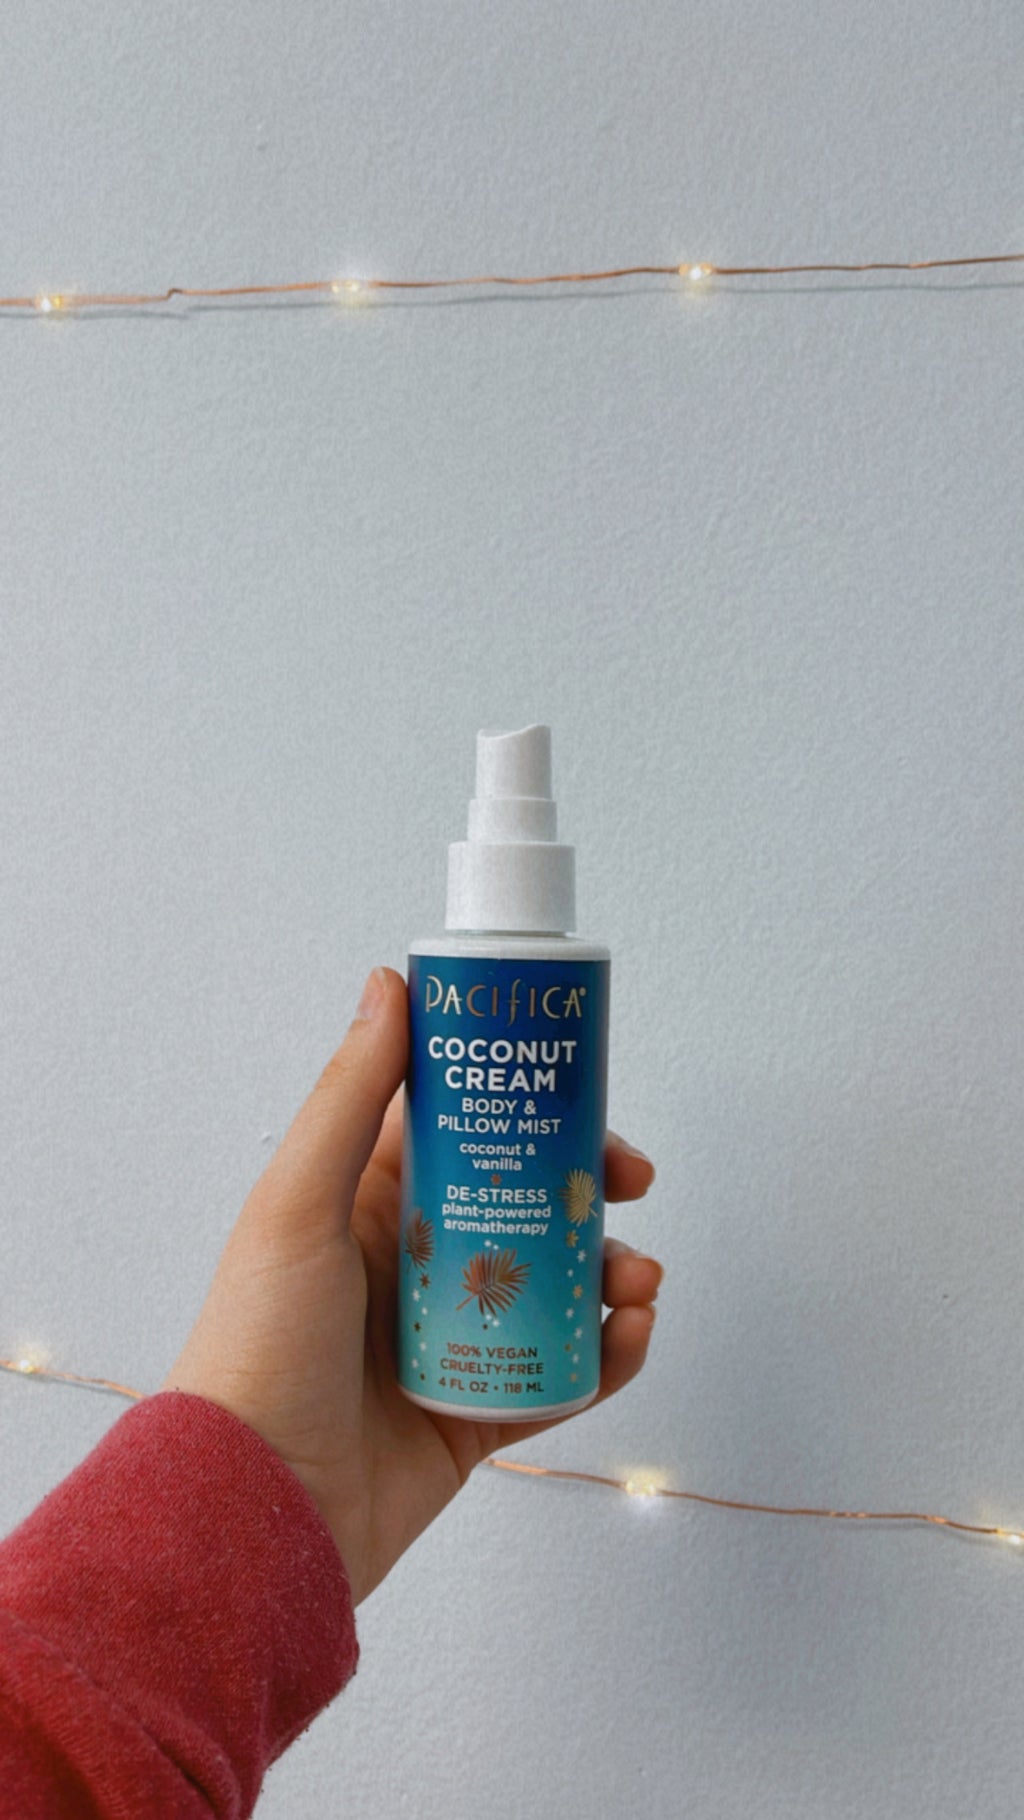 This is an image of the Pacifica coconut cream Body and Pillow mist. I am using it for an article on better sleep habits.